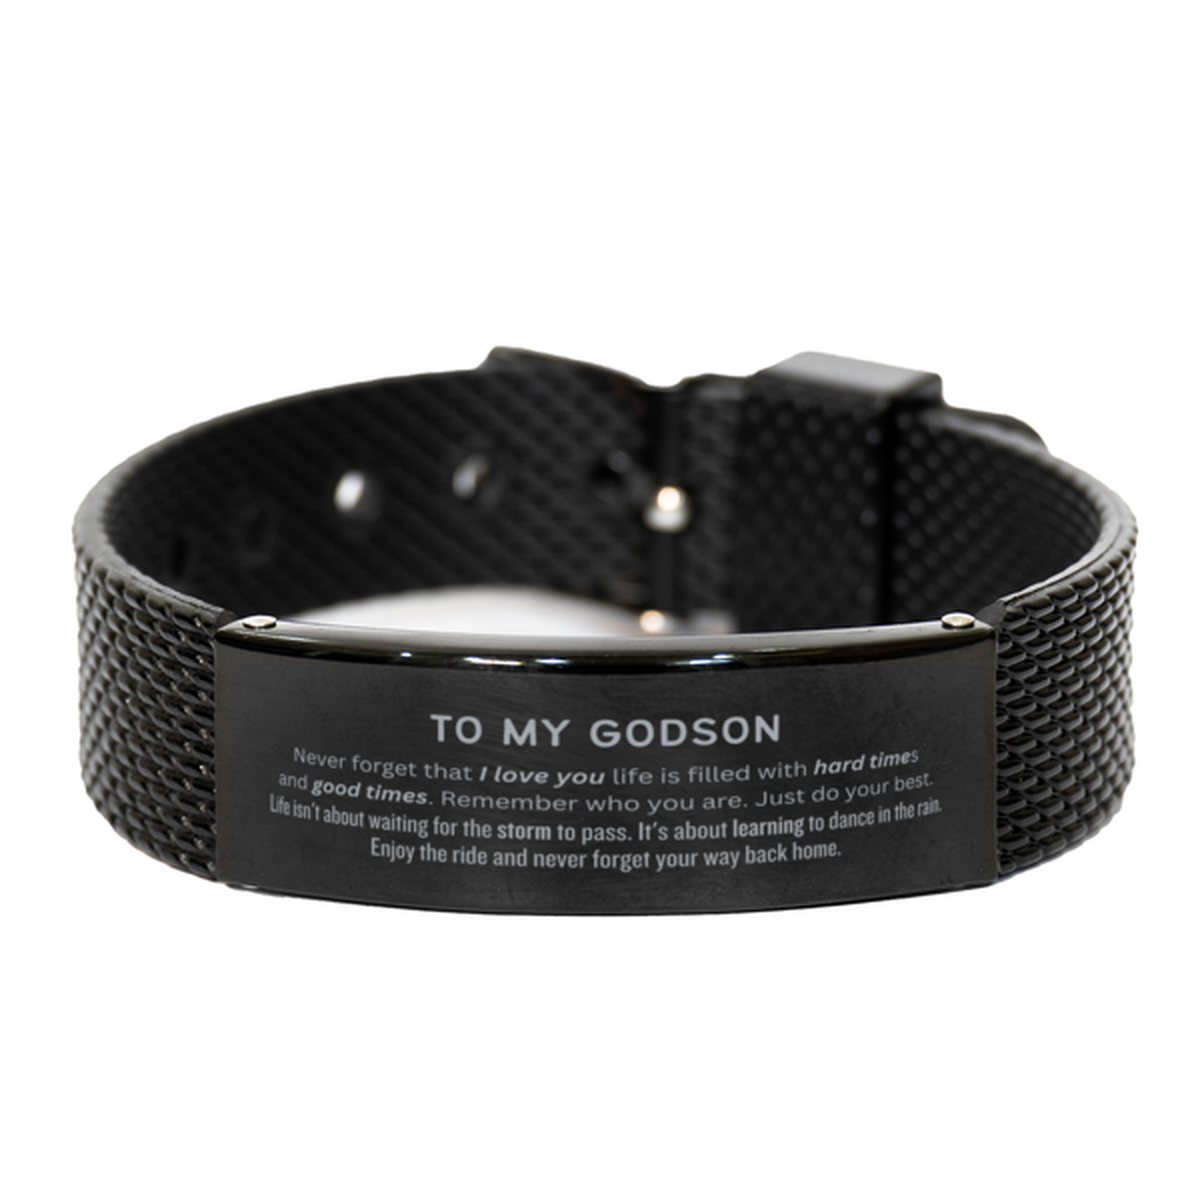 Christmas Godson Black Shark Mesh Bracelet Gifts, To My Godson Birthday Thank You Gifts For Godson, Graduation Unique Gifts For Godson To My Godson Never forget that I love you life is filled with hard times and good times. Remember who you are. Just do y